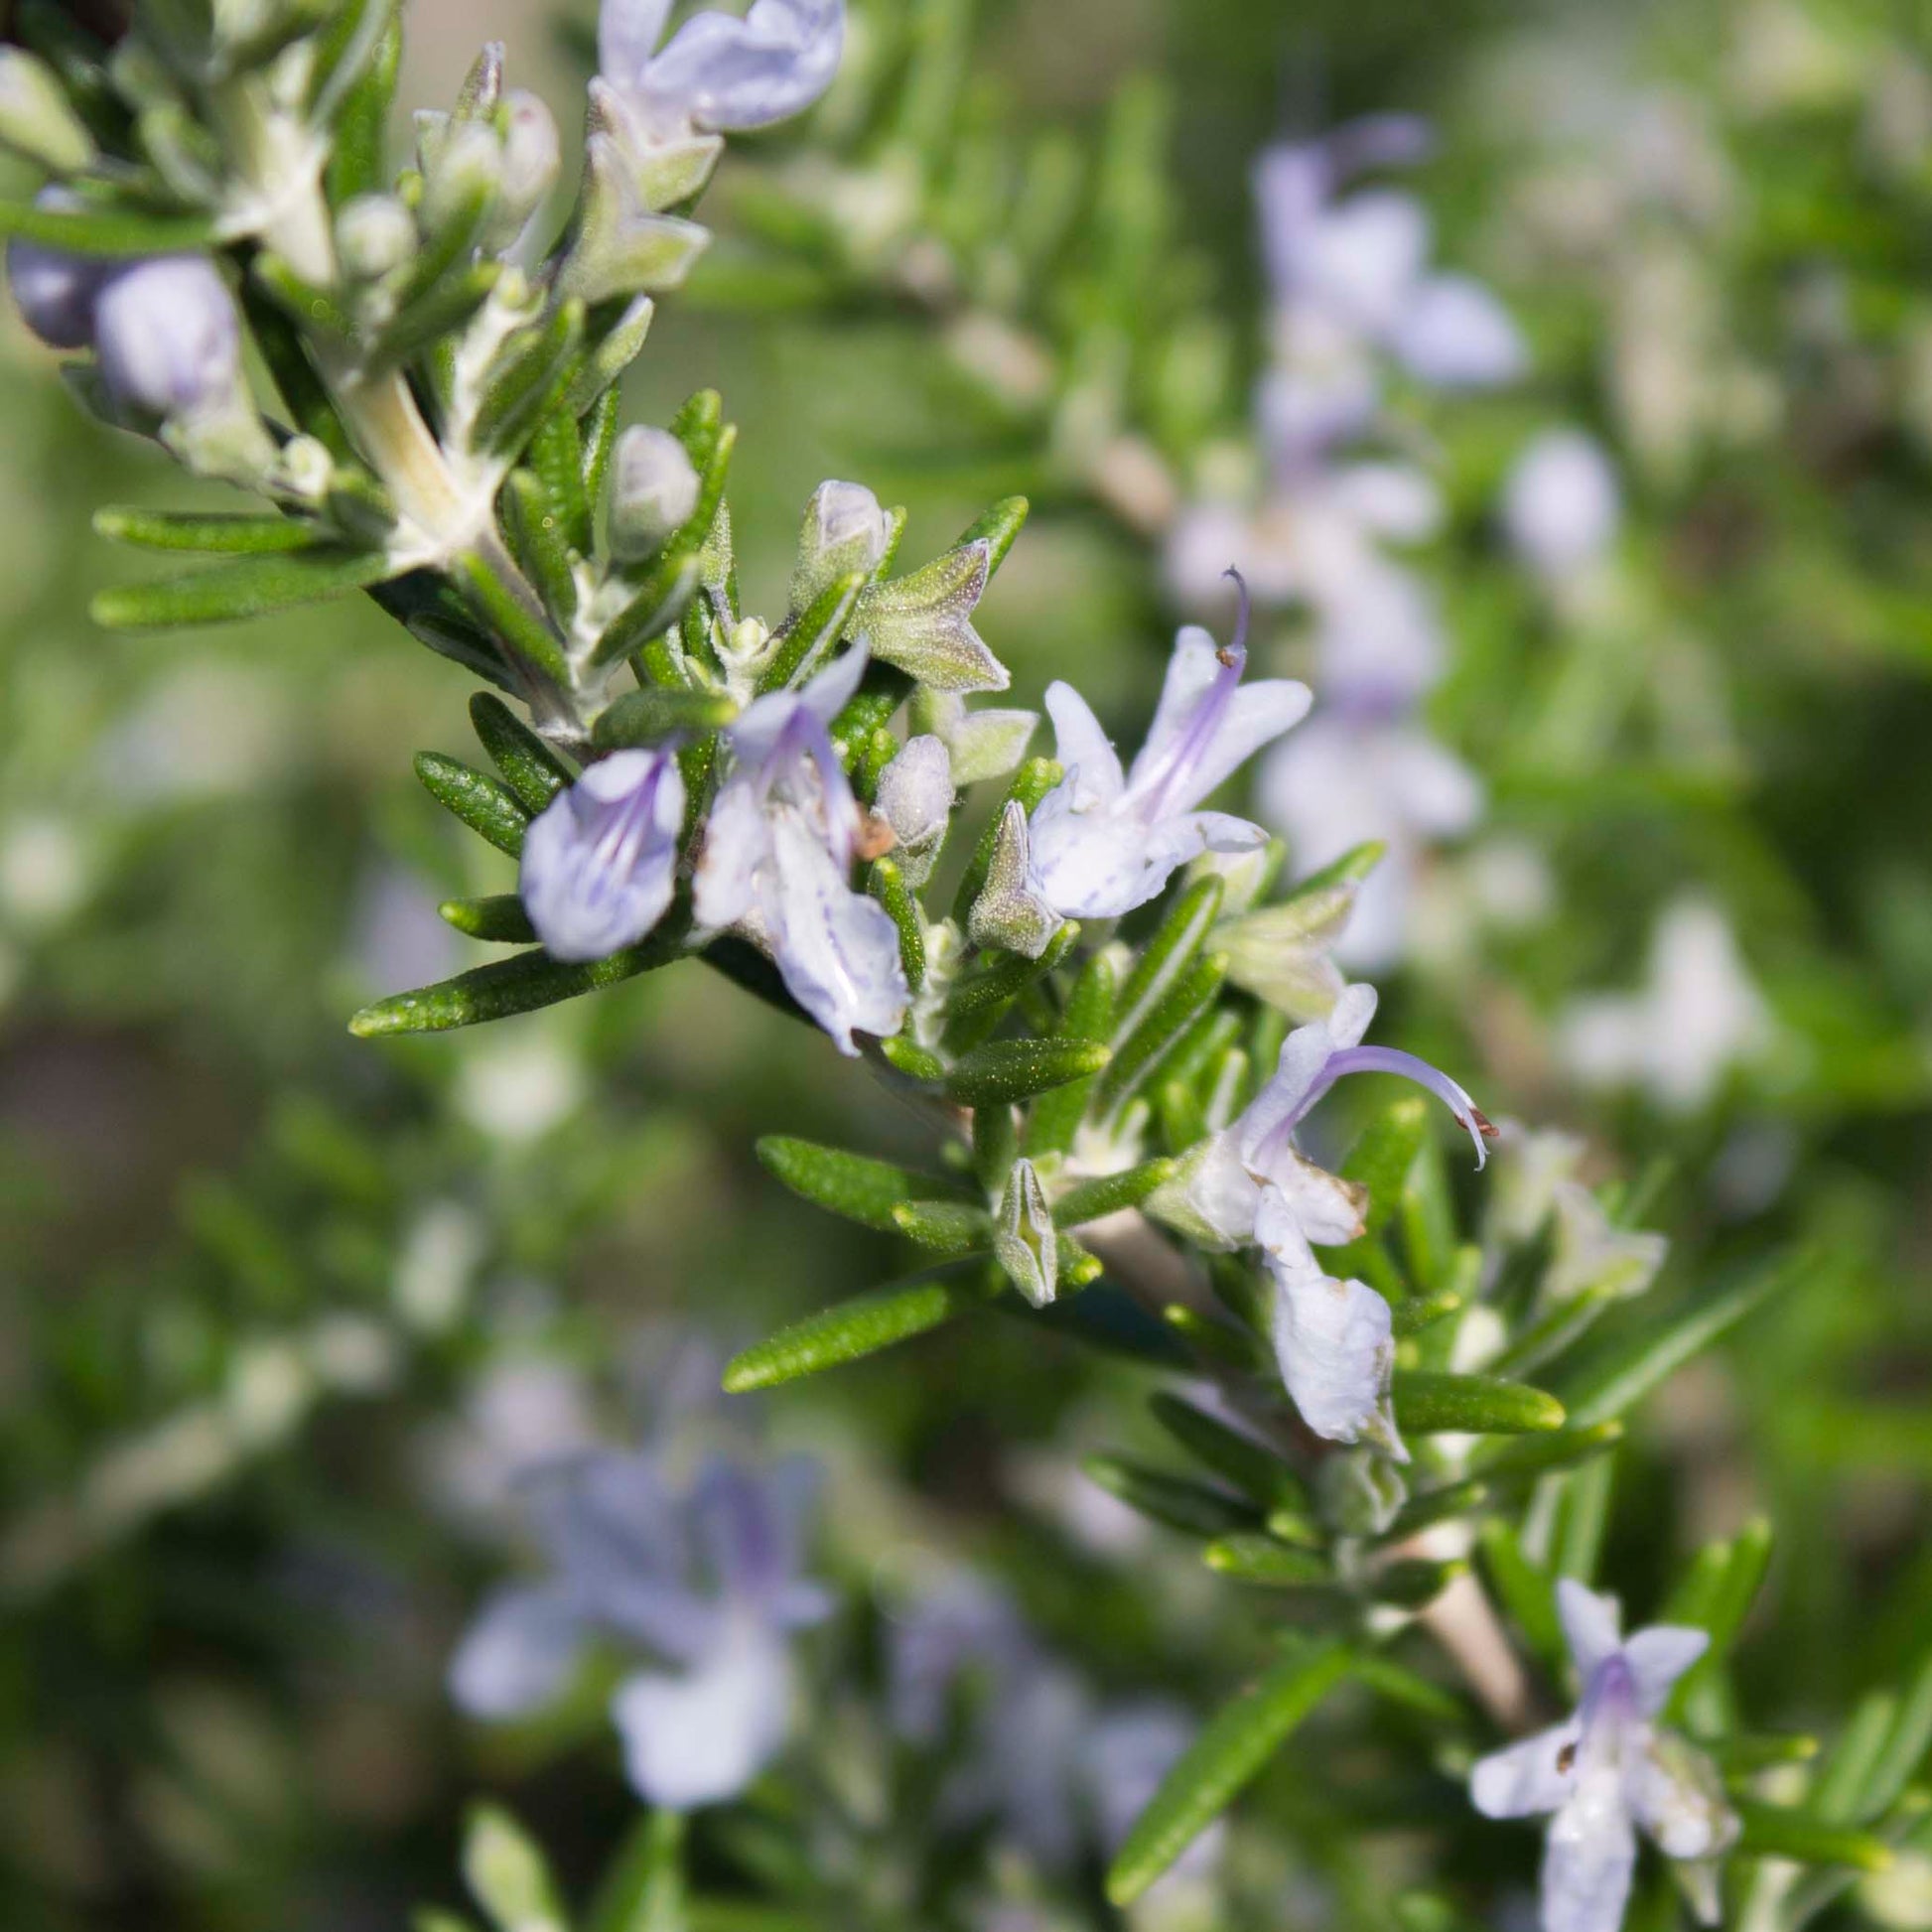 Rosemary Handcrafted plant essences flower remedies